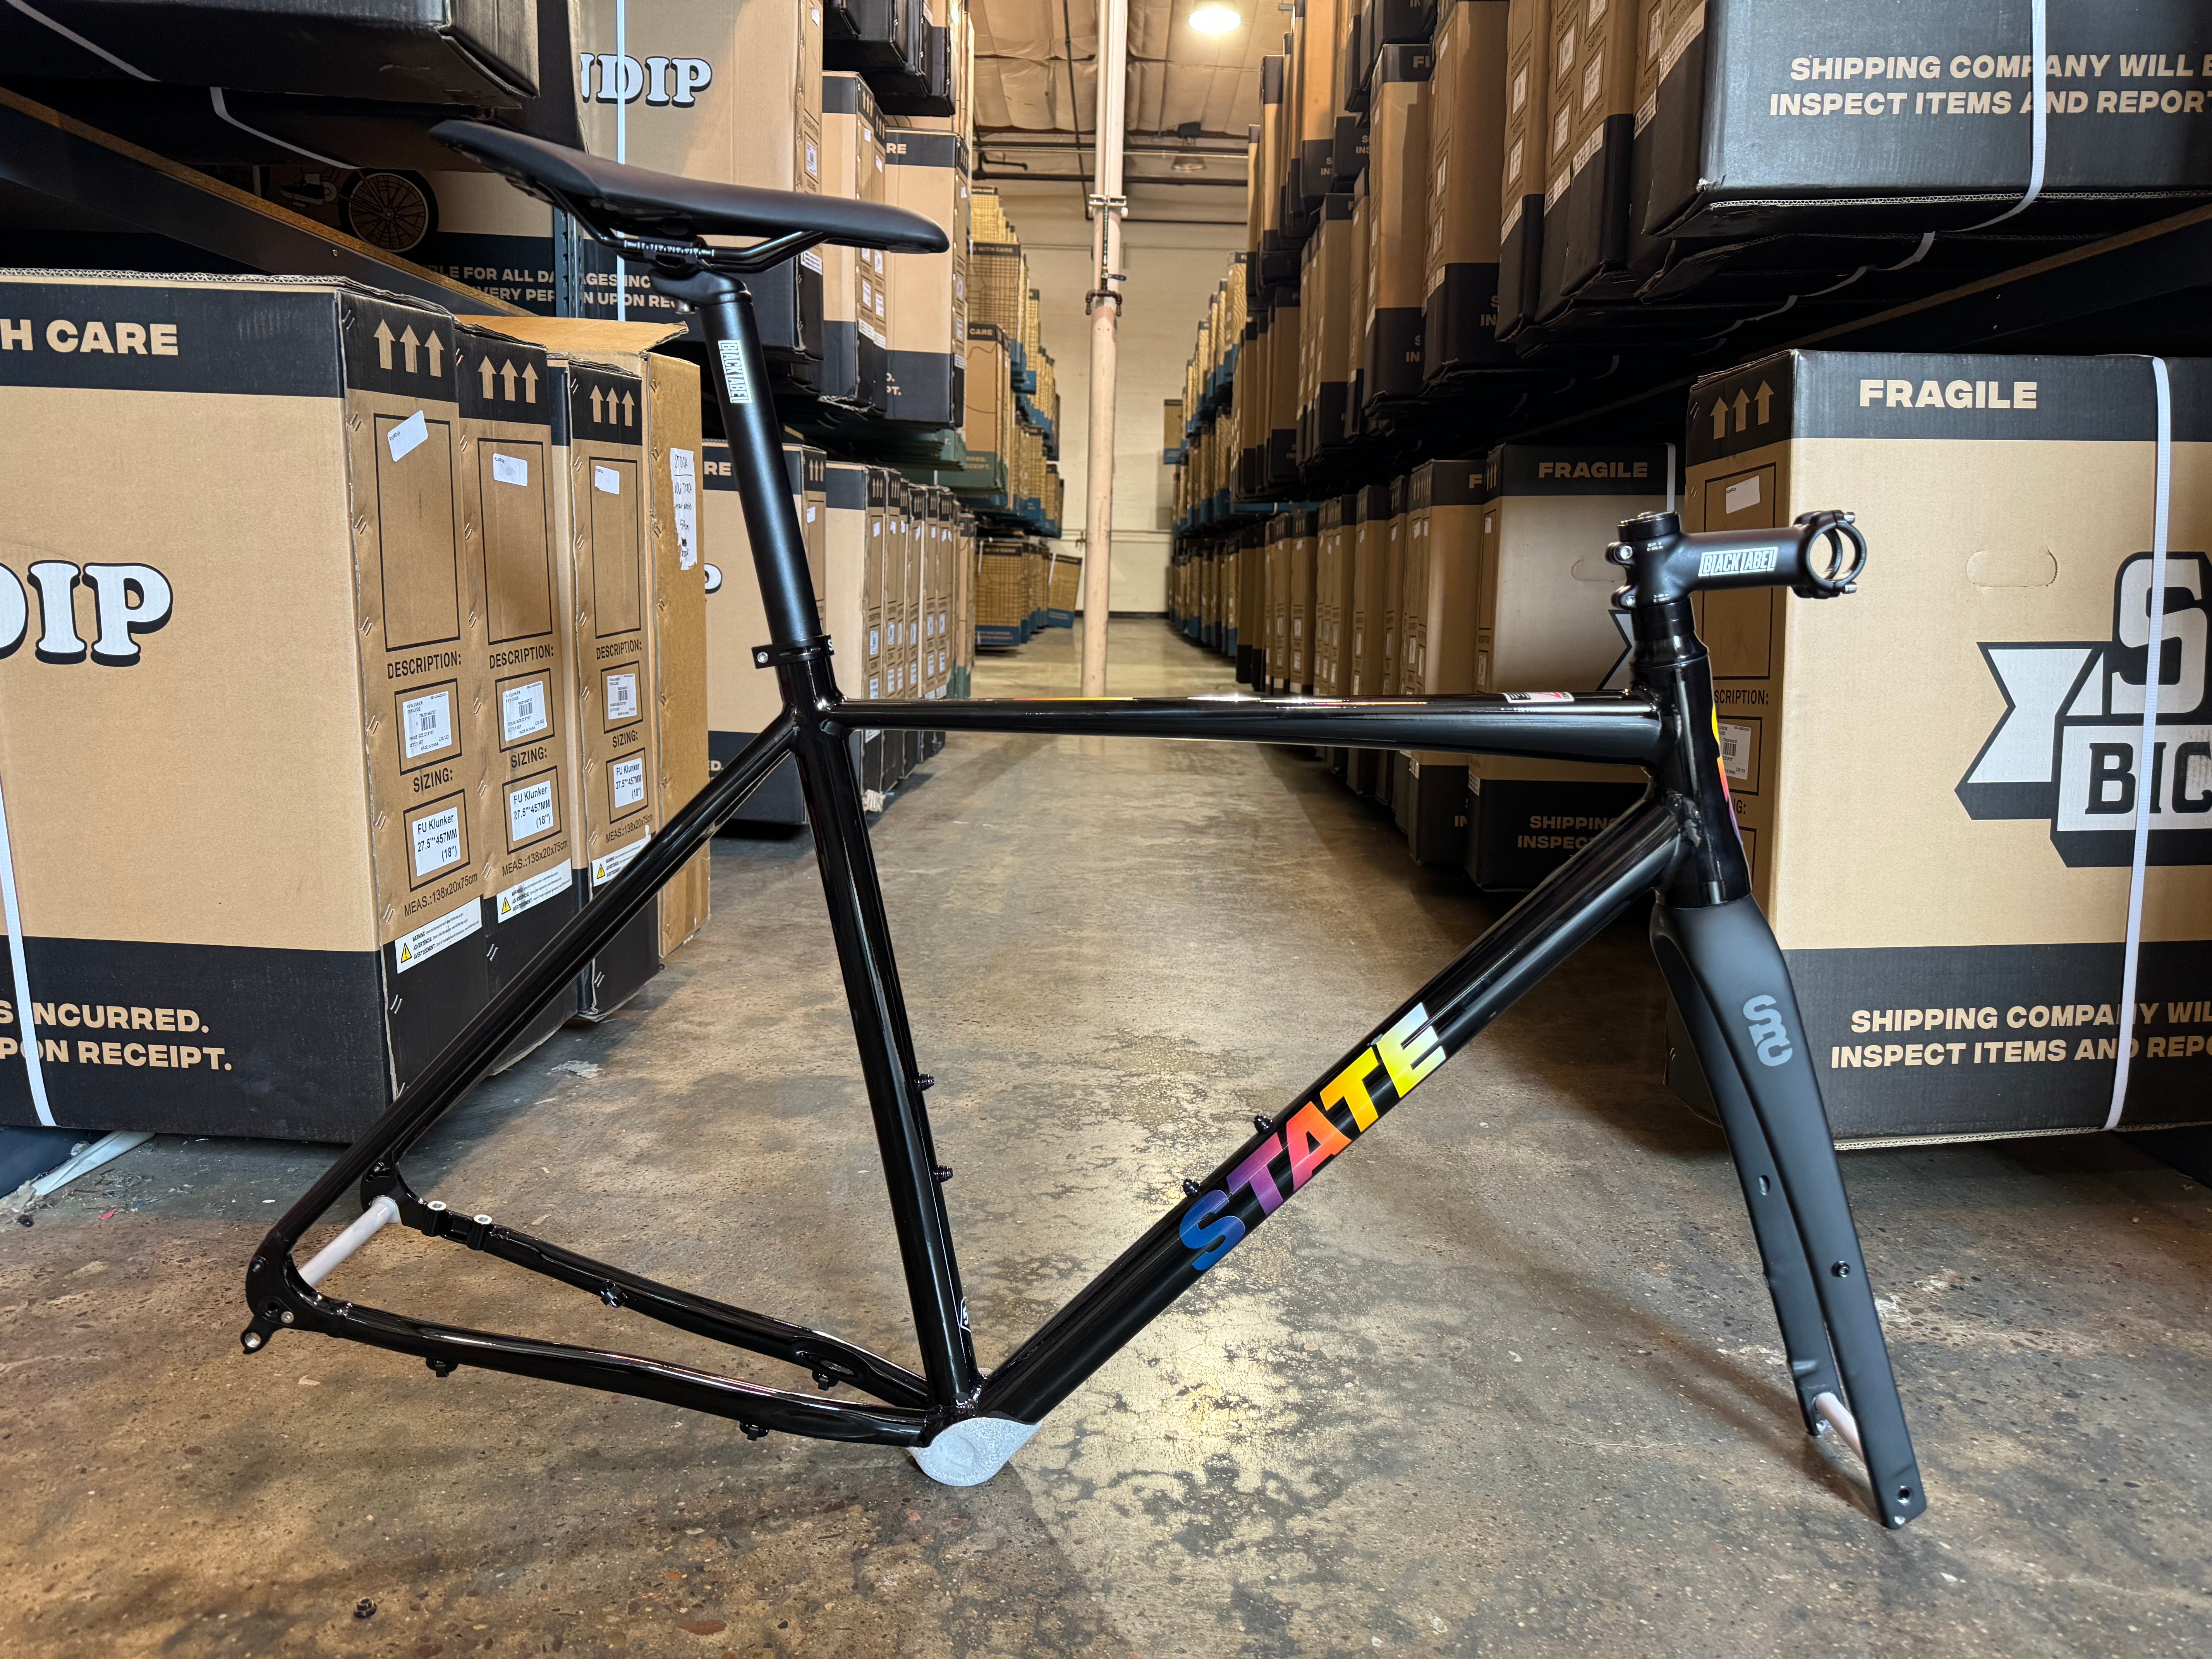 #929 - 6061 All-Road - Black Sunset- Frameset + Extras - Size M (54cm) - Very Good Condition